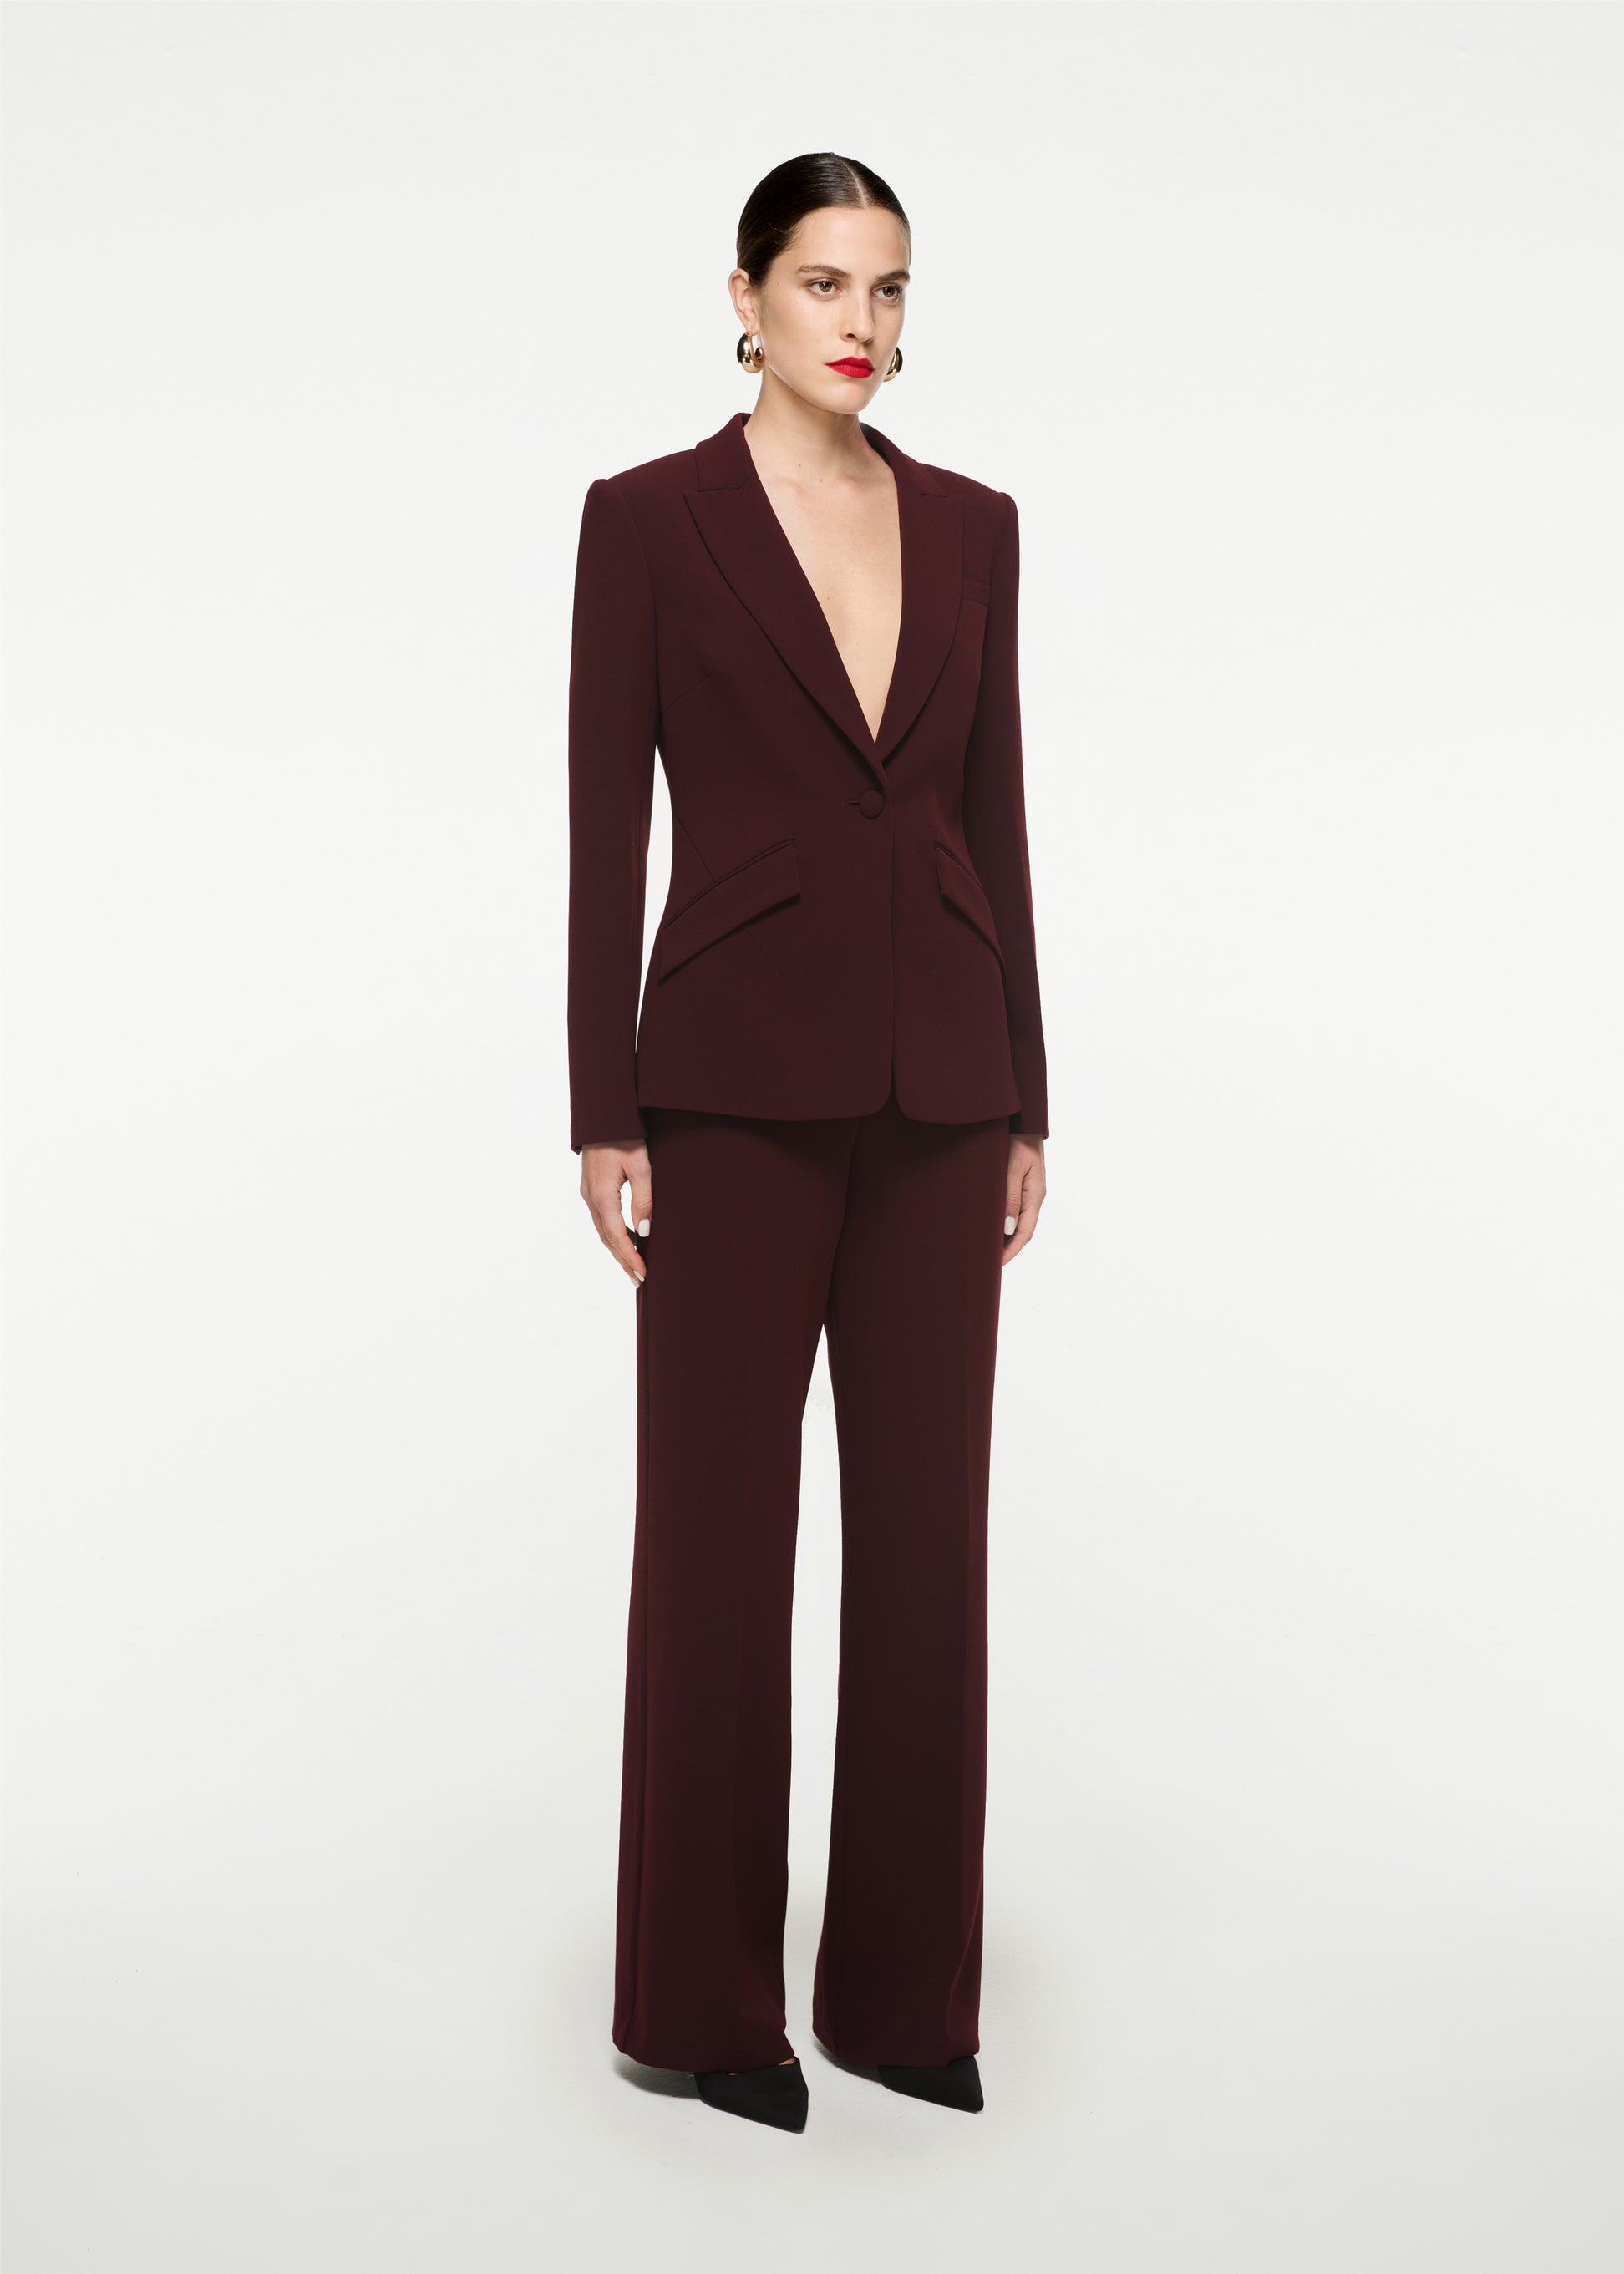 Woman wearing the Single Breasted Stretch Cady Blazer in Maroon